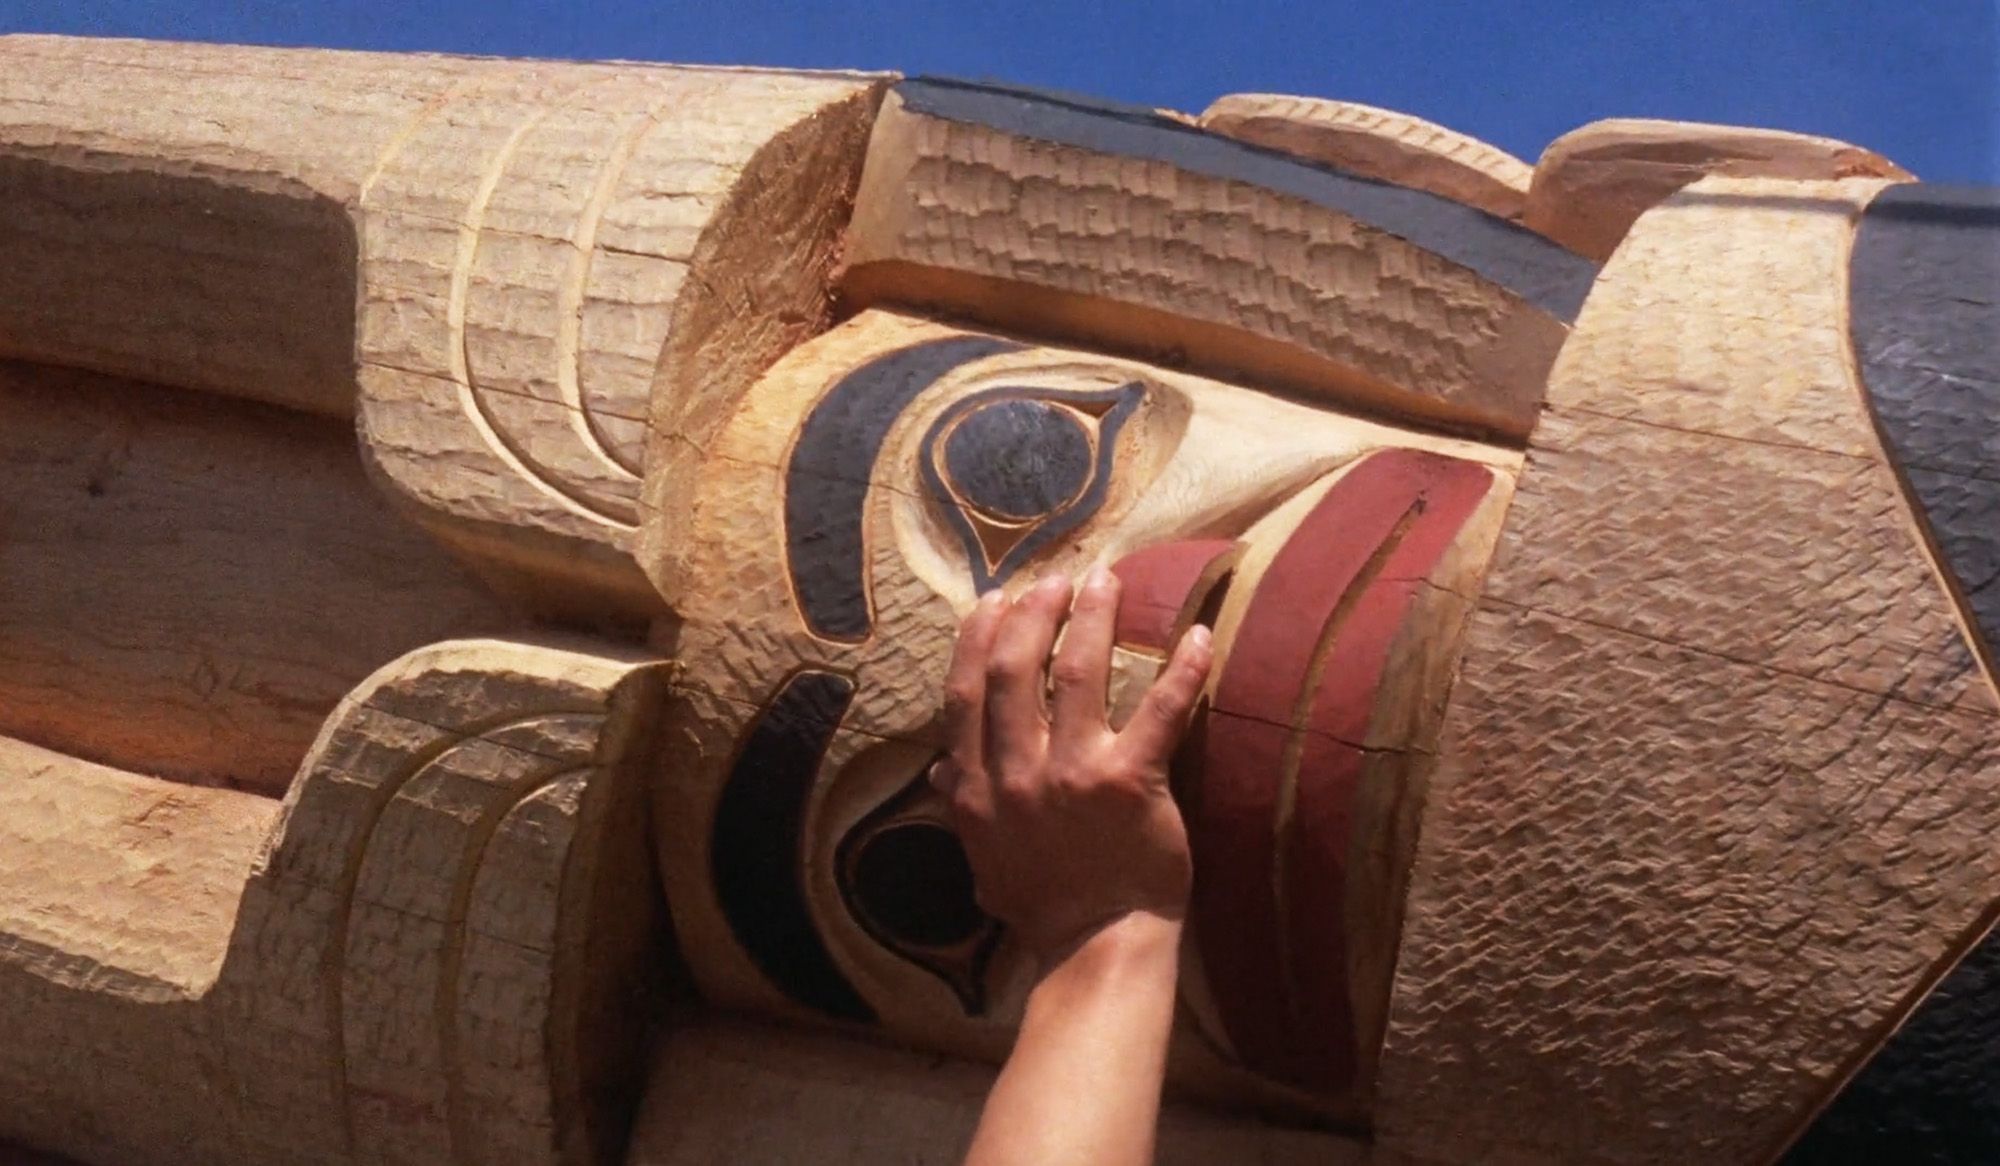 Restored footage reveals how a totem pole raising sparked a cultural rebirth | Psyche